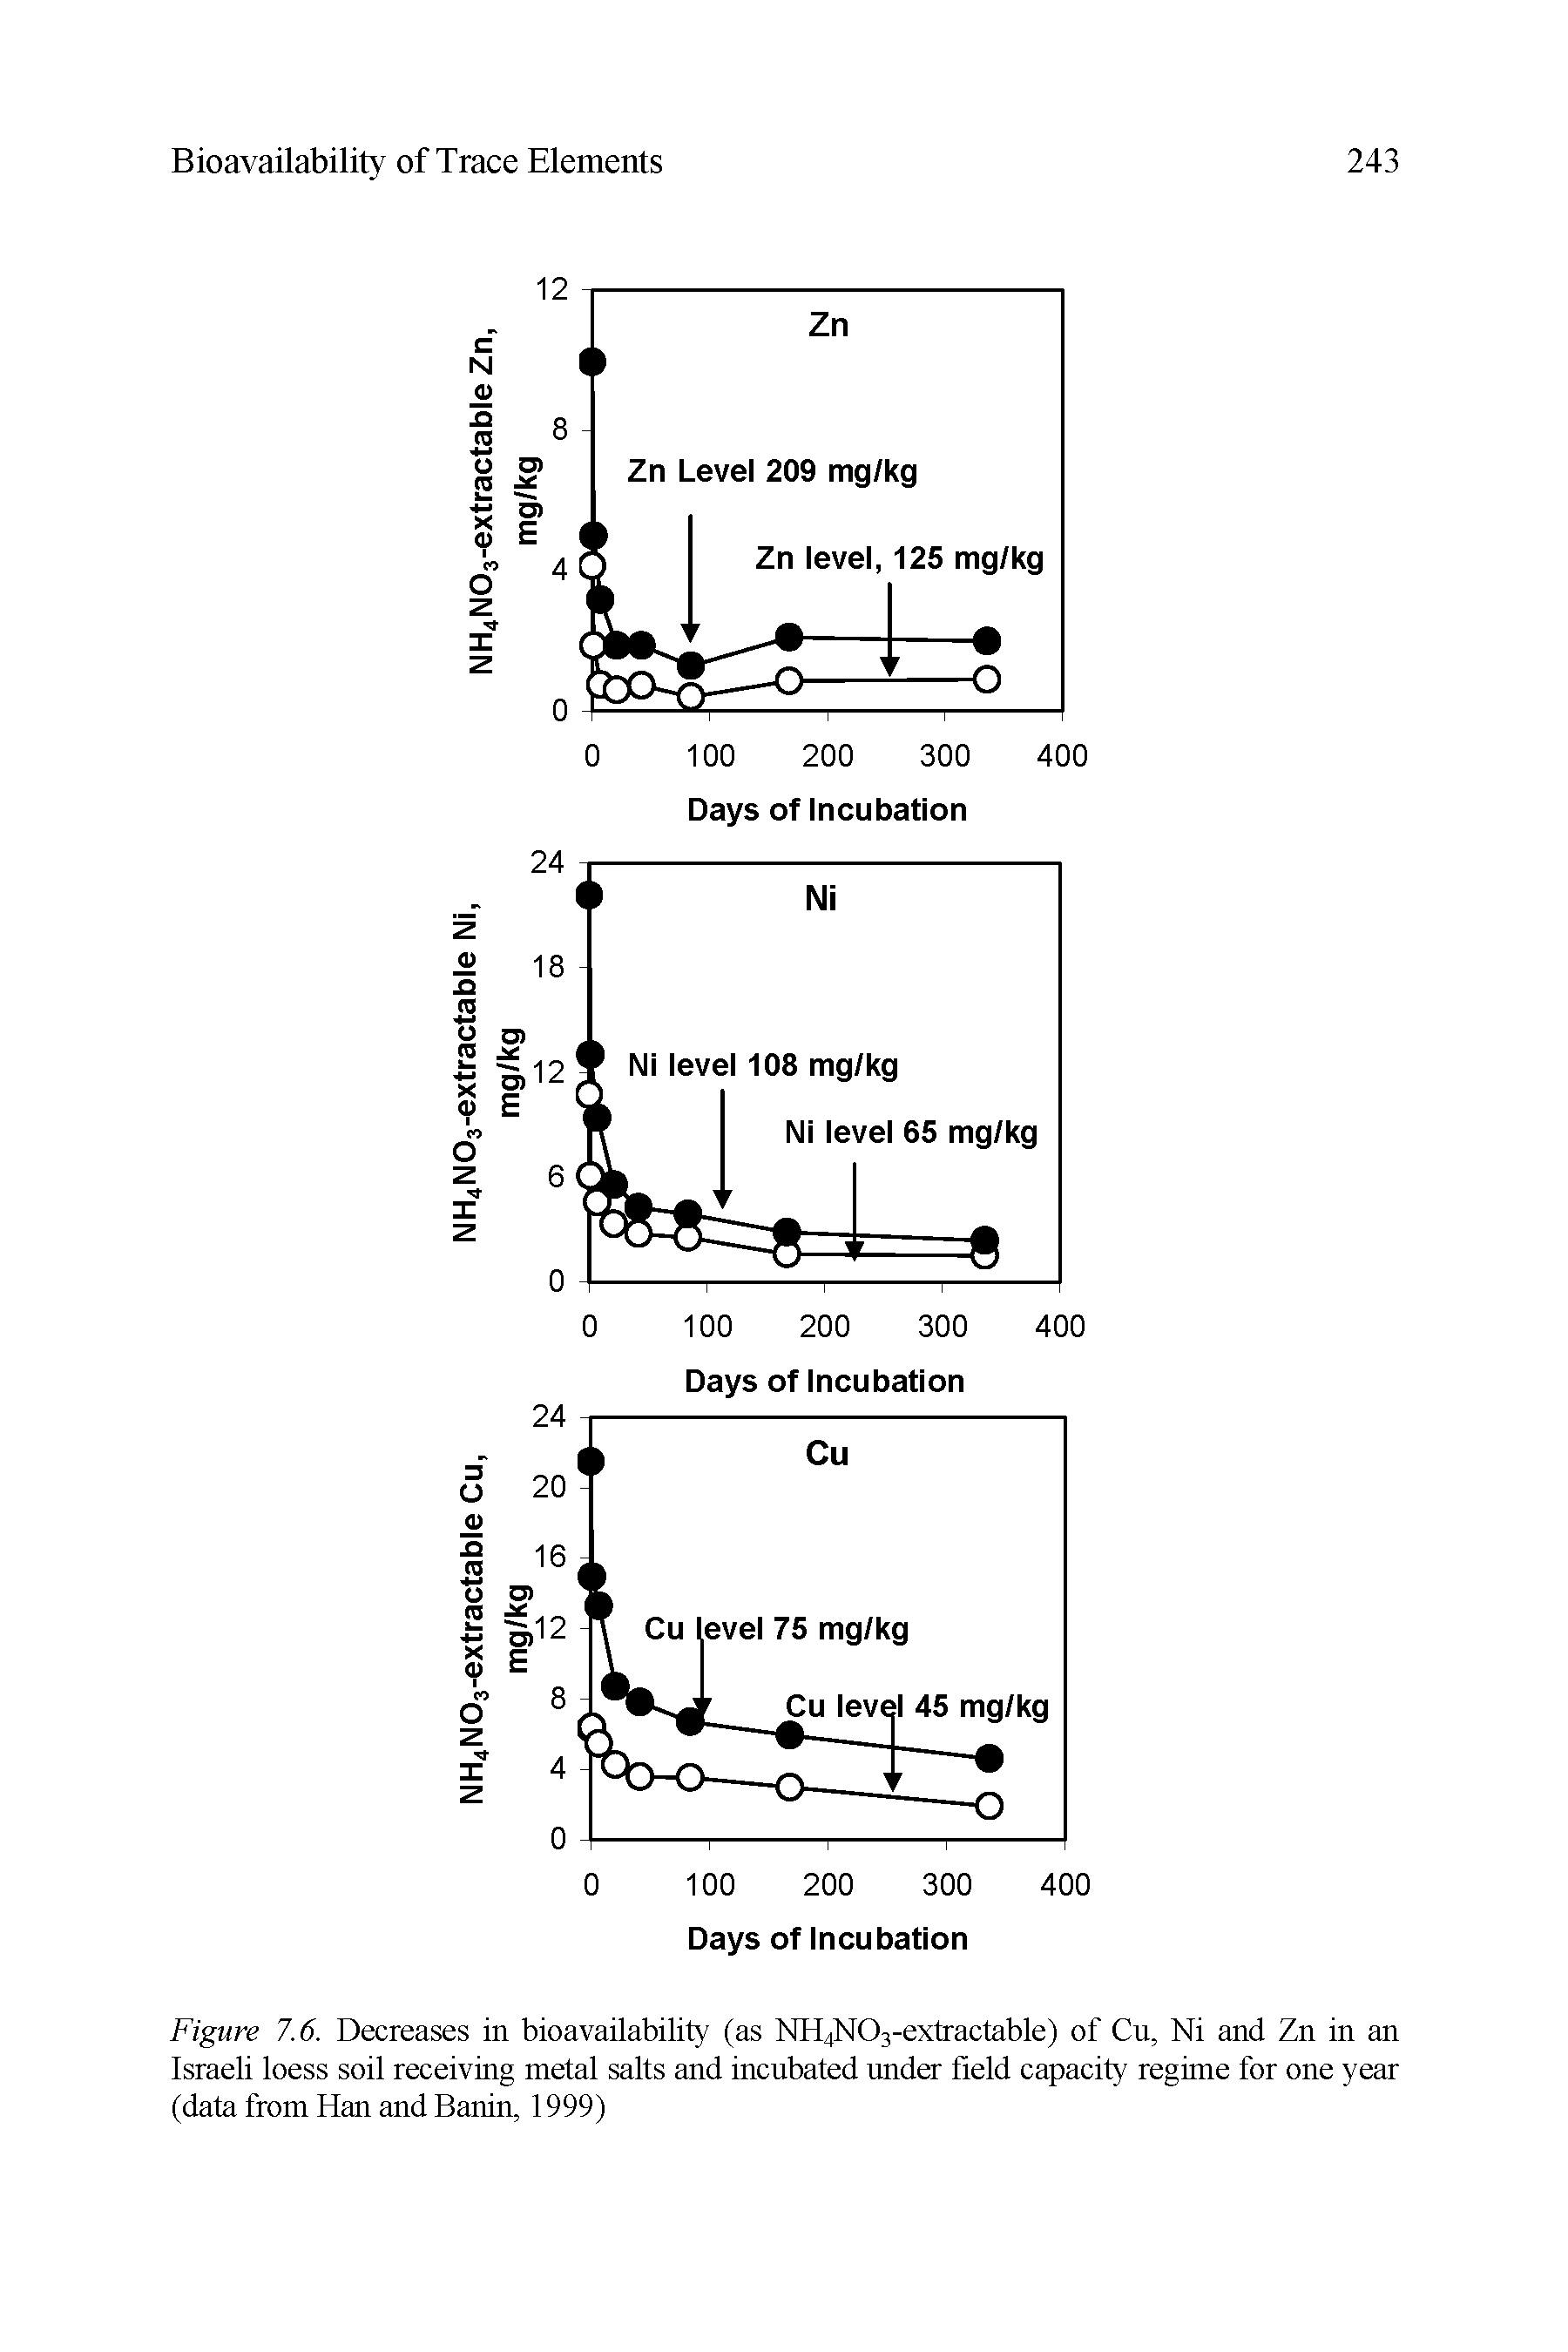 Figure 7.6. Decreases in bioavailability (as NH4N03-extractable) of Cu, Ni and Zn in an Israeli loess soil receiving metal salts and incubated under field capacity regime for one year (data from Han and Banin, 1999)...